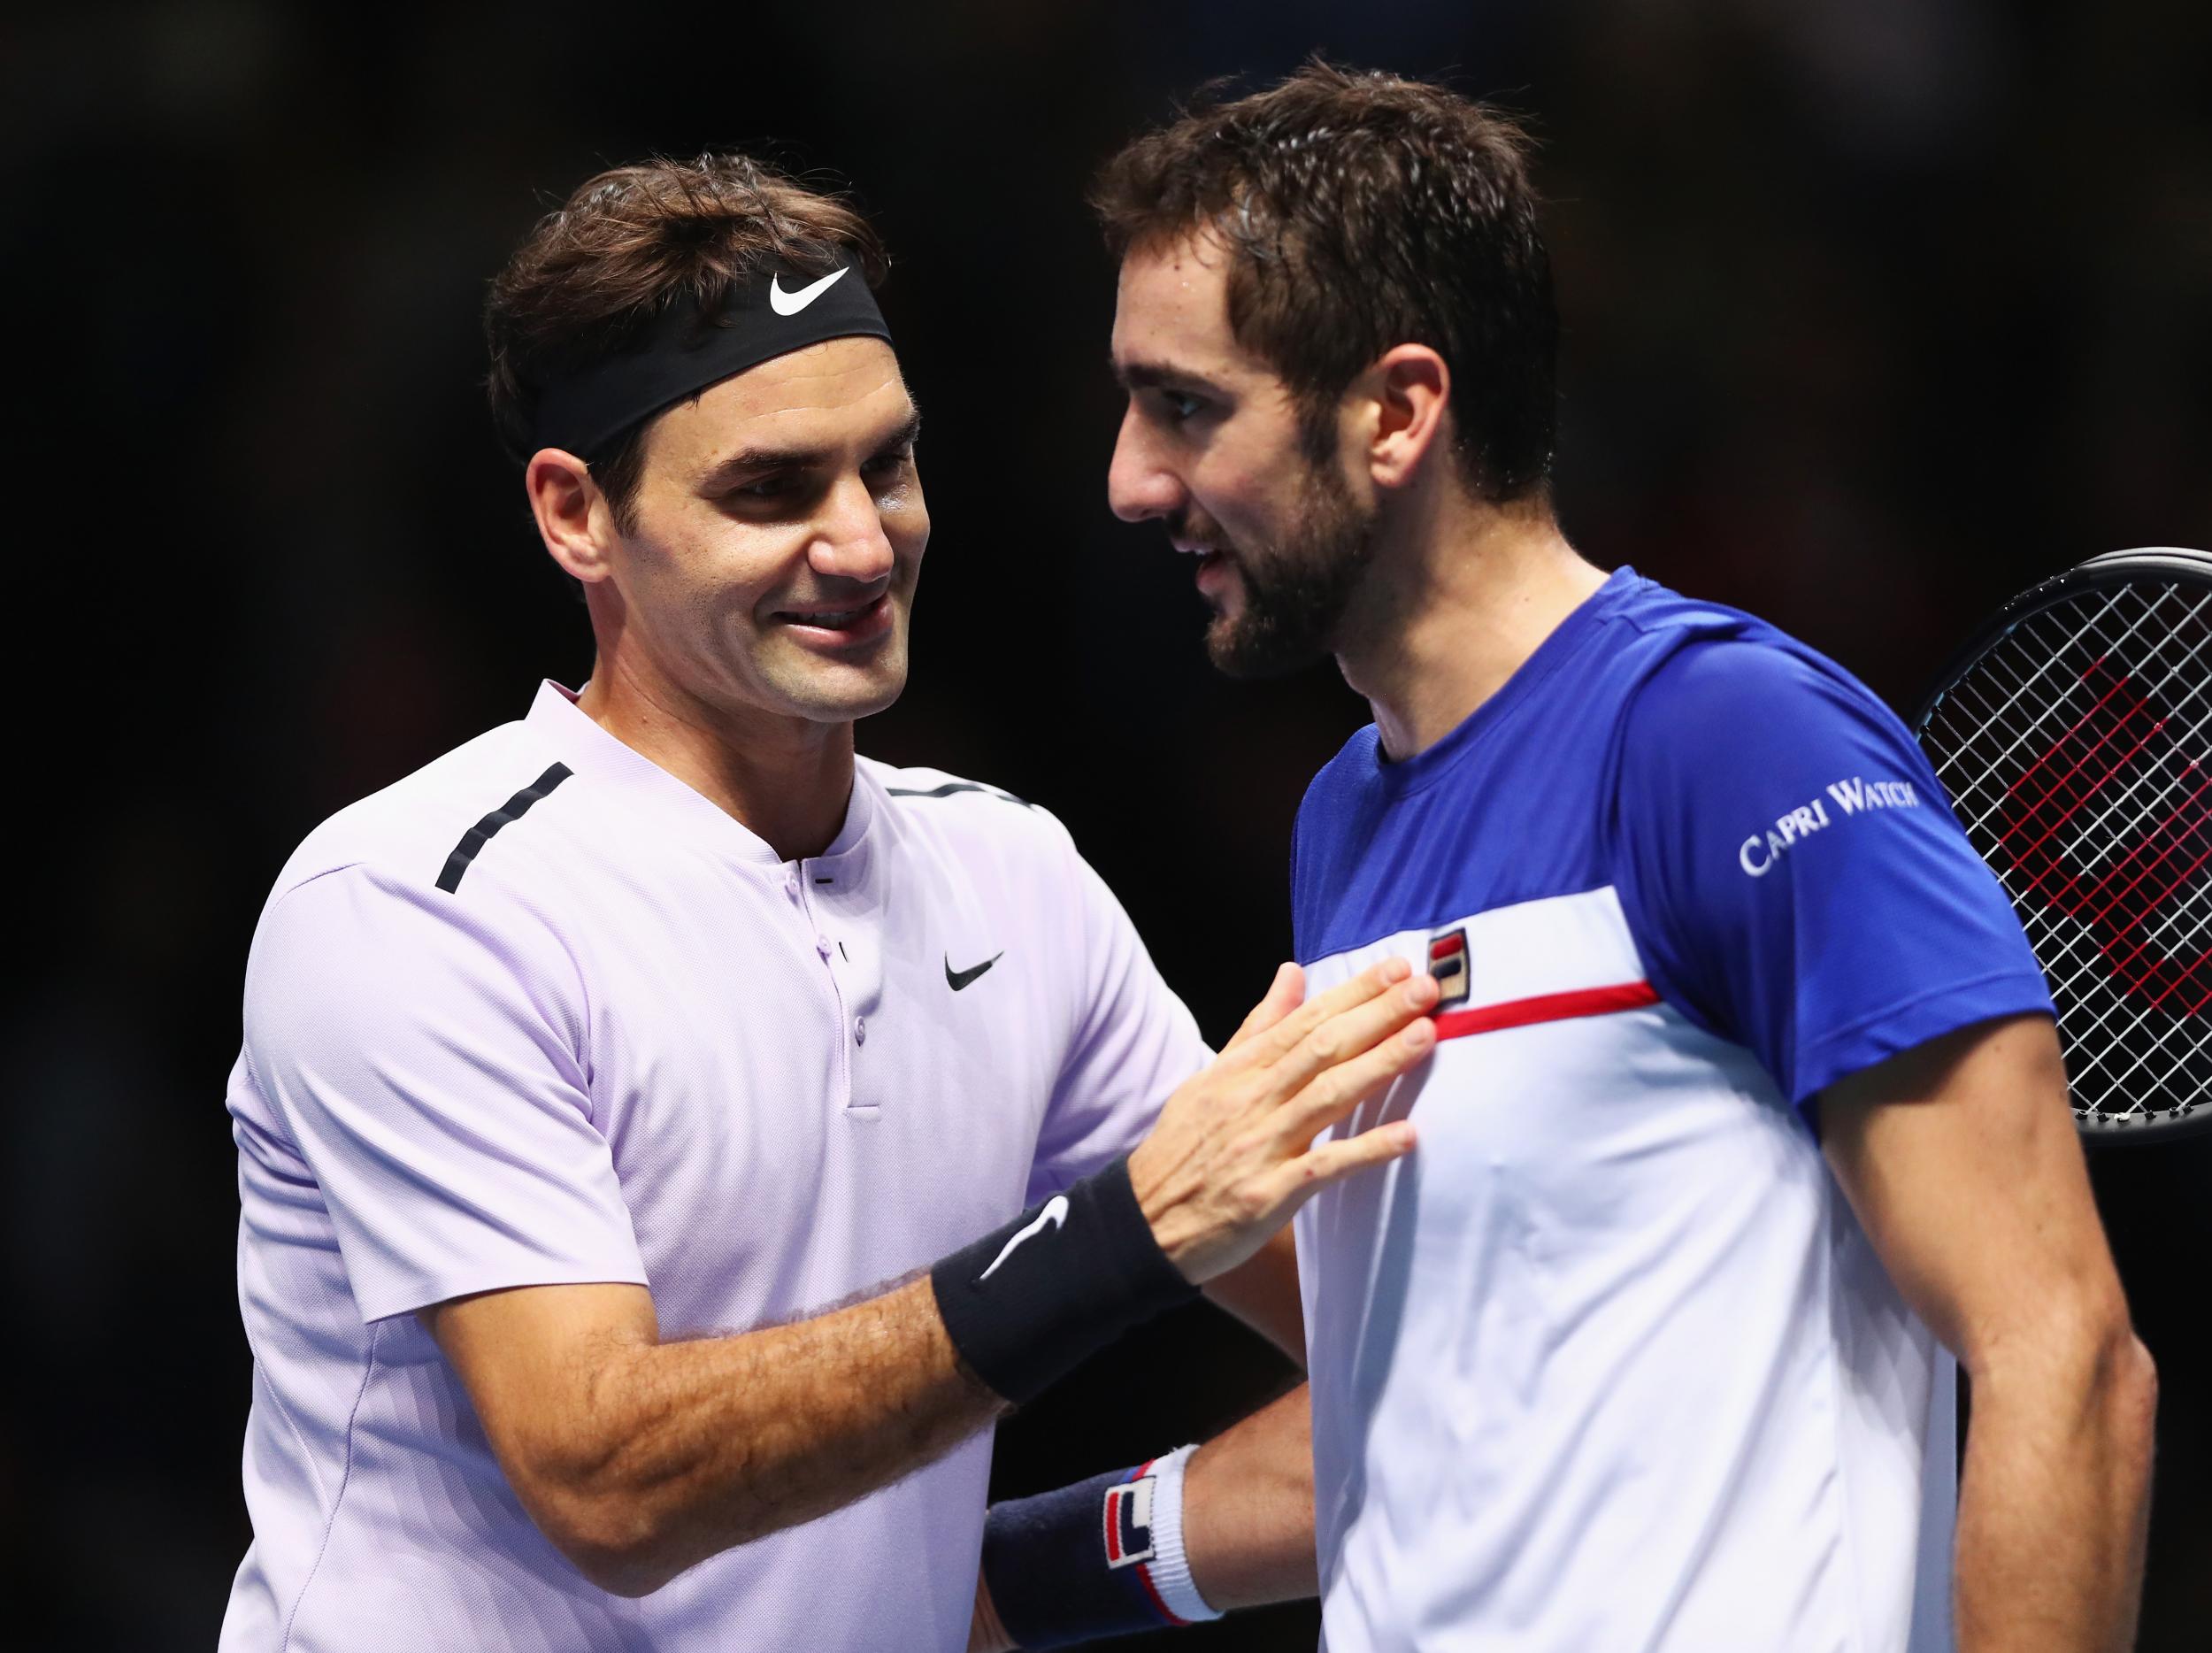 Roger Federer and Marin Cilic go head-to-head in the Australian Open final